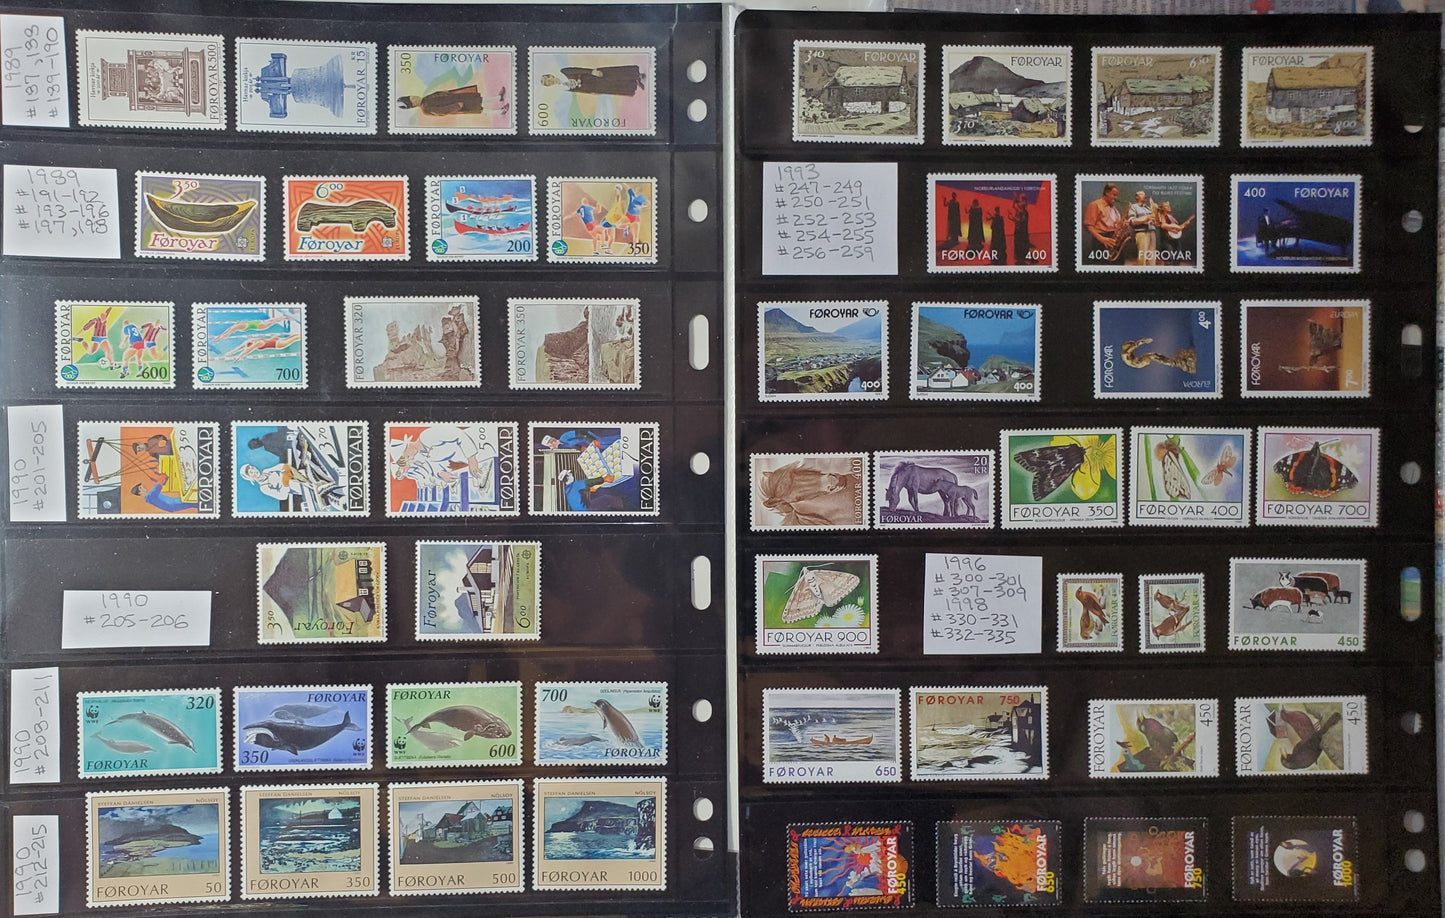 Faroe Islands - Collection of 72 MNH Sets Issued Between 1975 and 1998, Plus 1975 Booklet and 1990 Annual Presentation Folder, 2023 Scott Cat. $326, Net $130